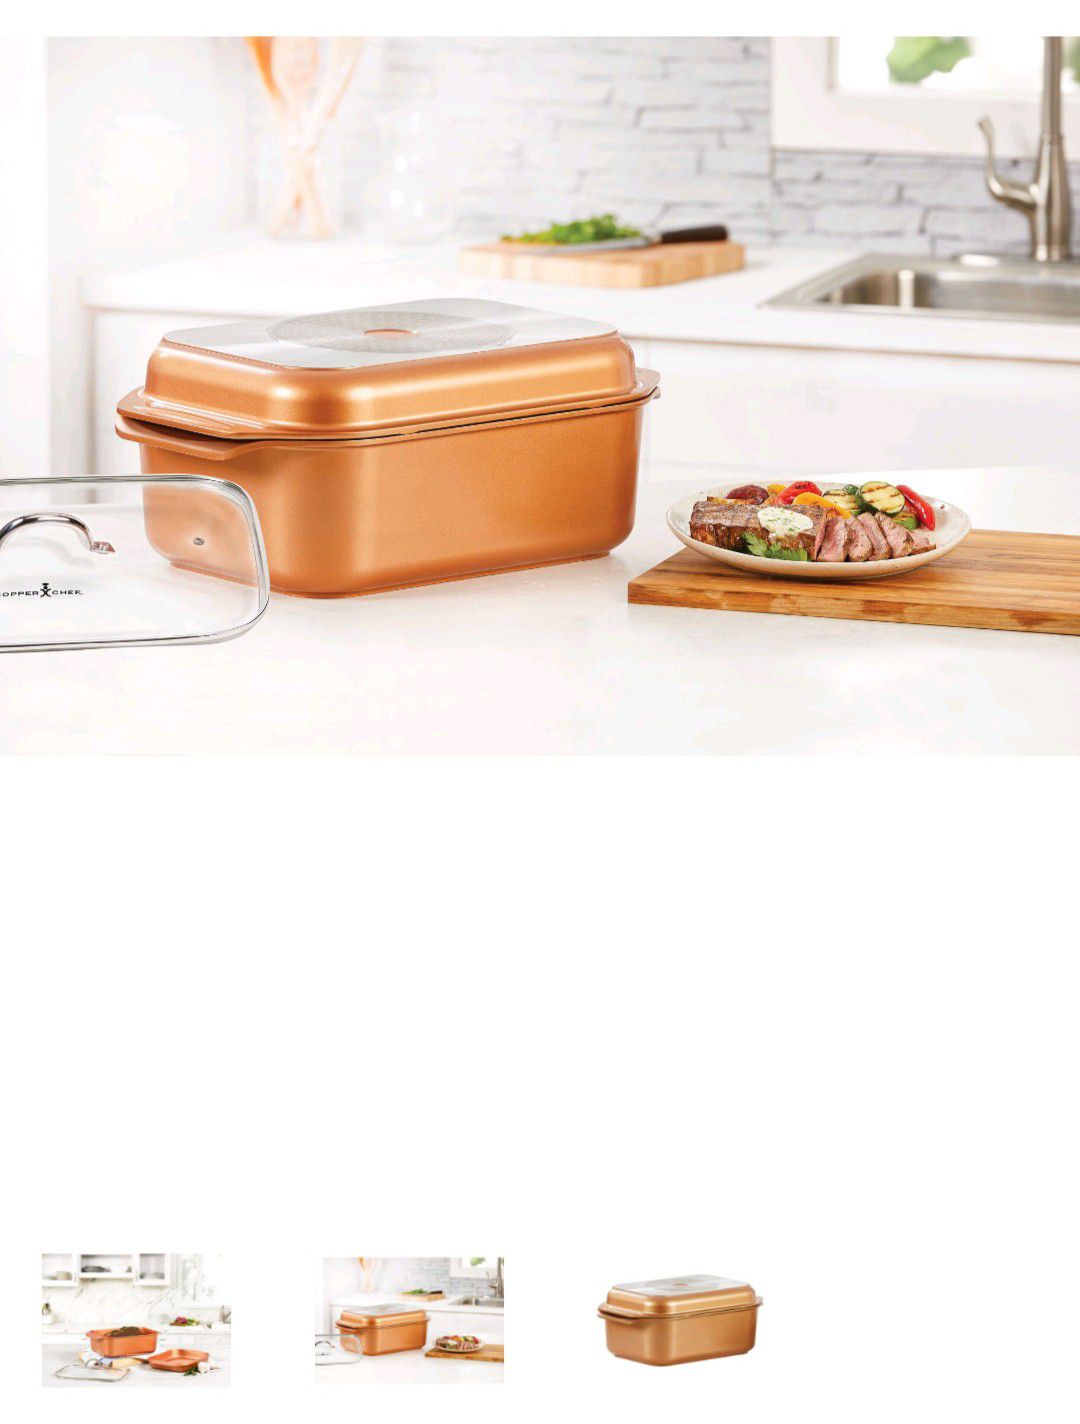 Copper Chef Wonder Cooker XL As Seen on TV